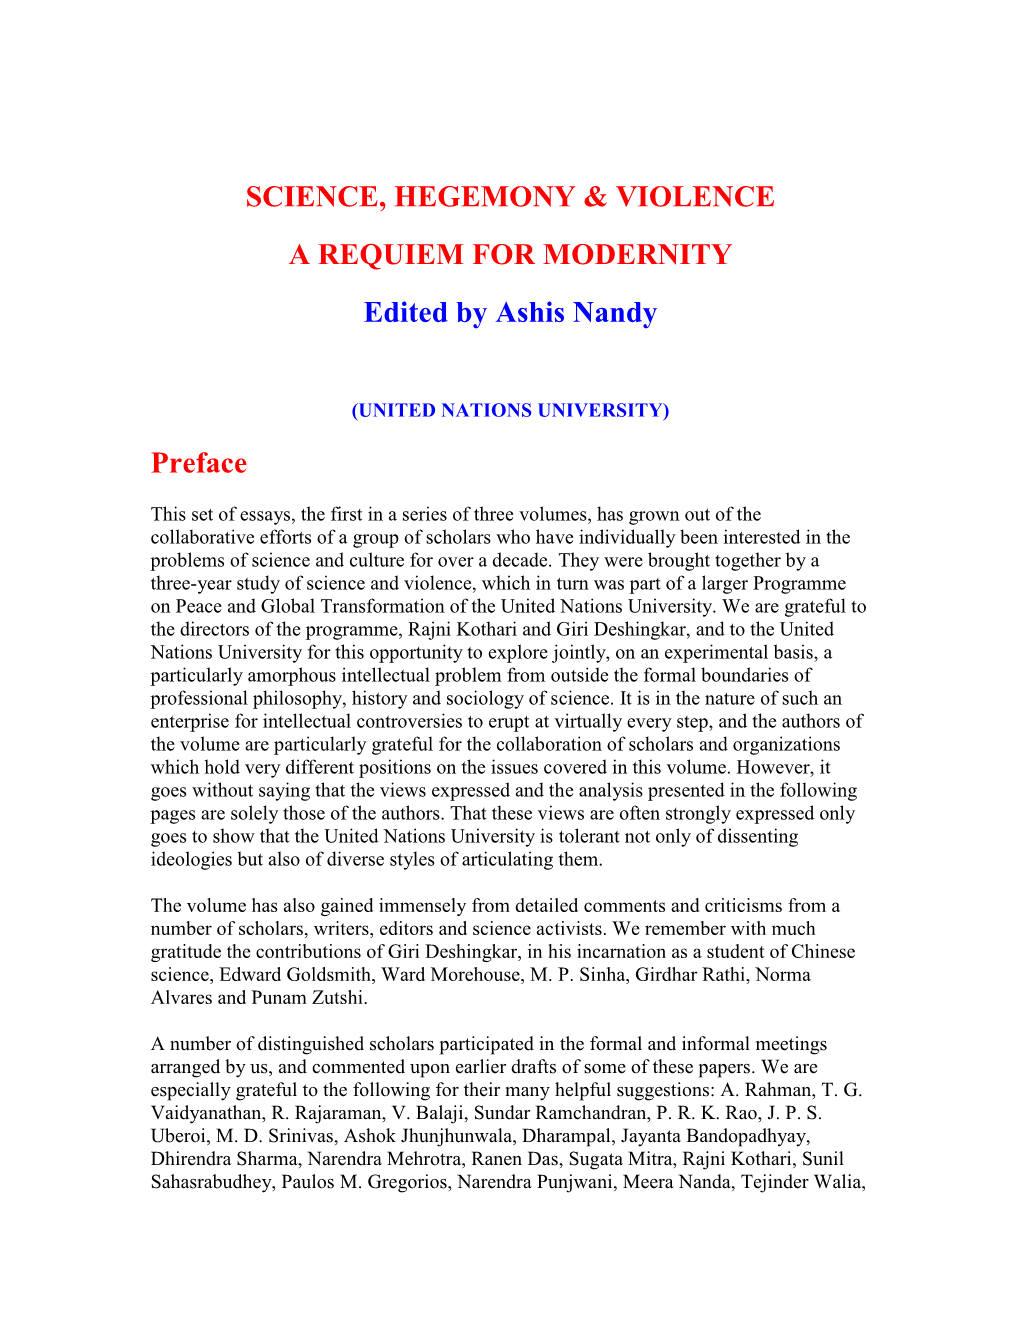 SCIENCE, HEGEMONY & VIOLENCE a REQUIEM for MODERNITY Edited by Ashis Nandy Preface